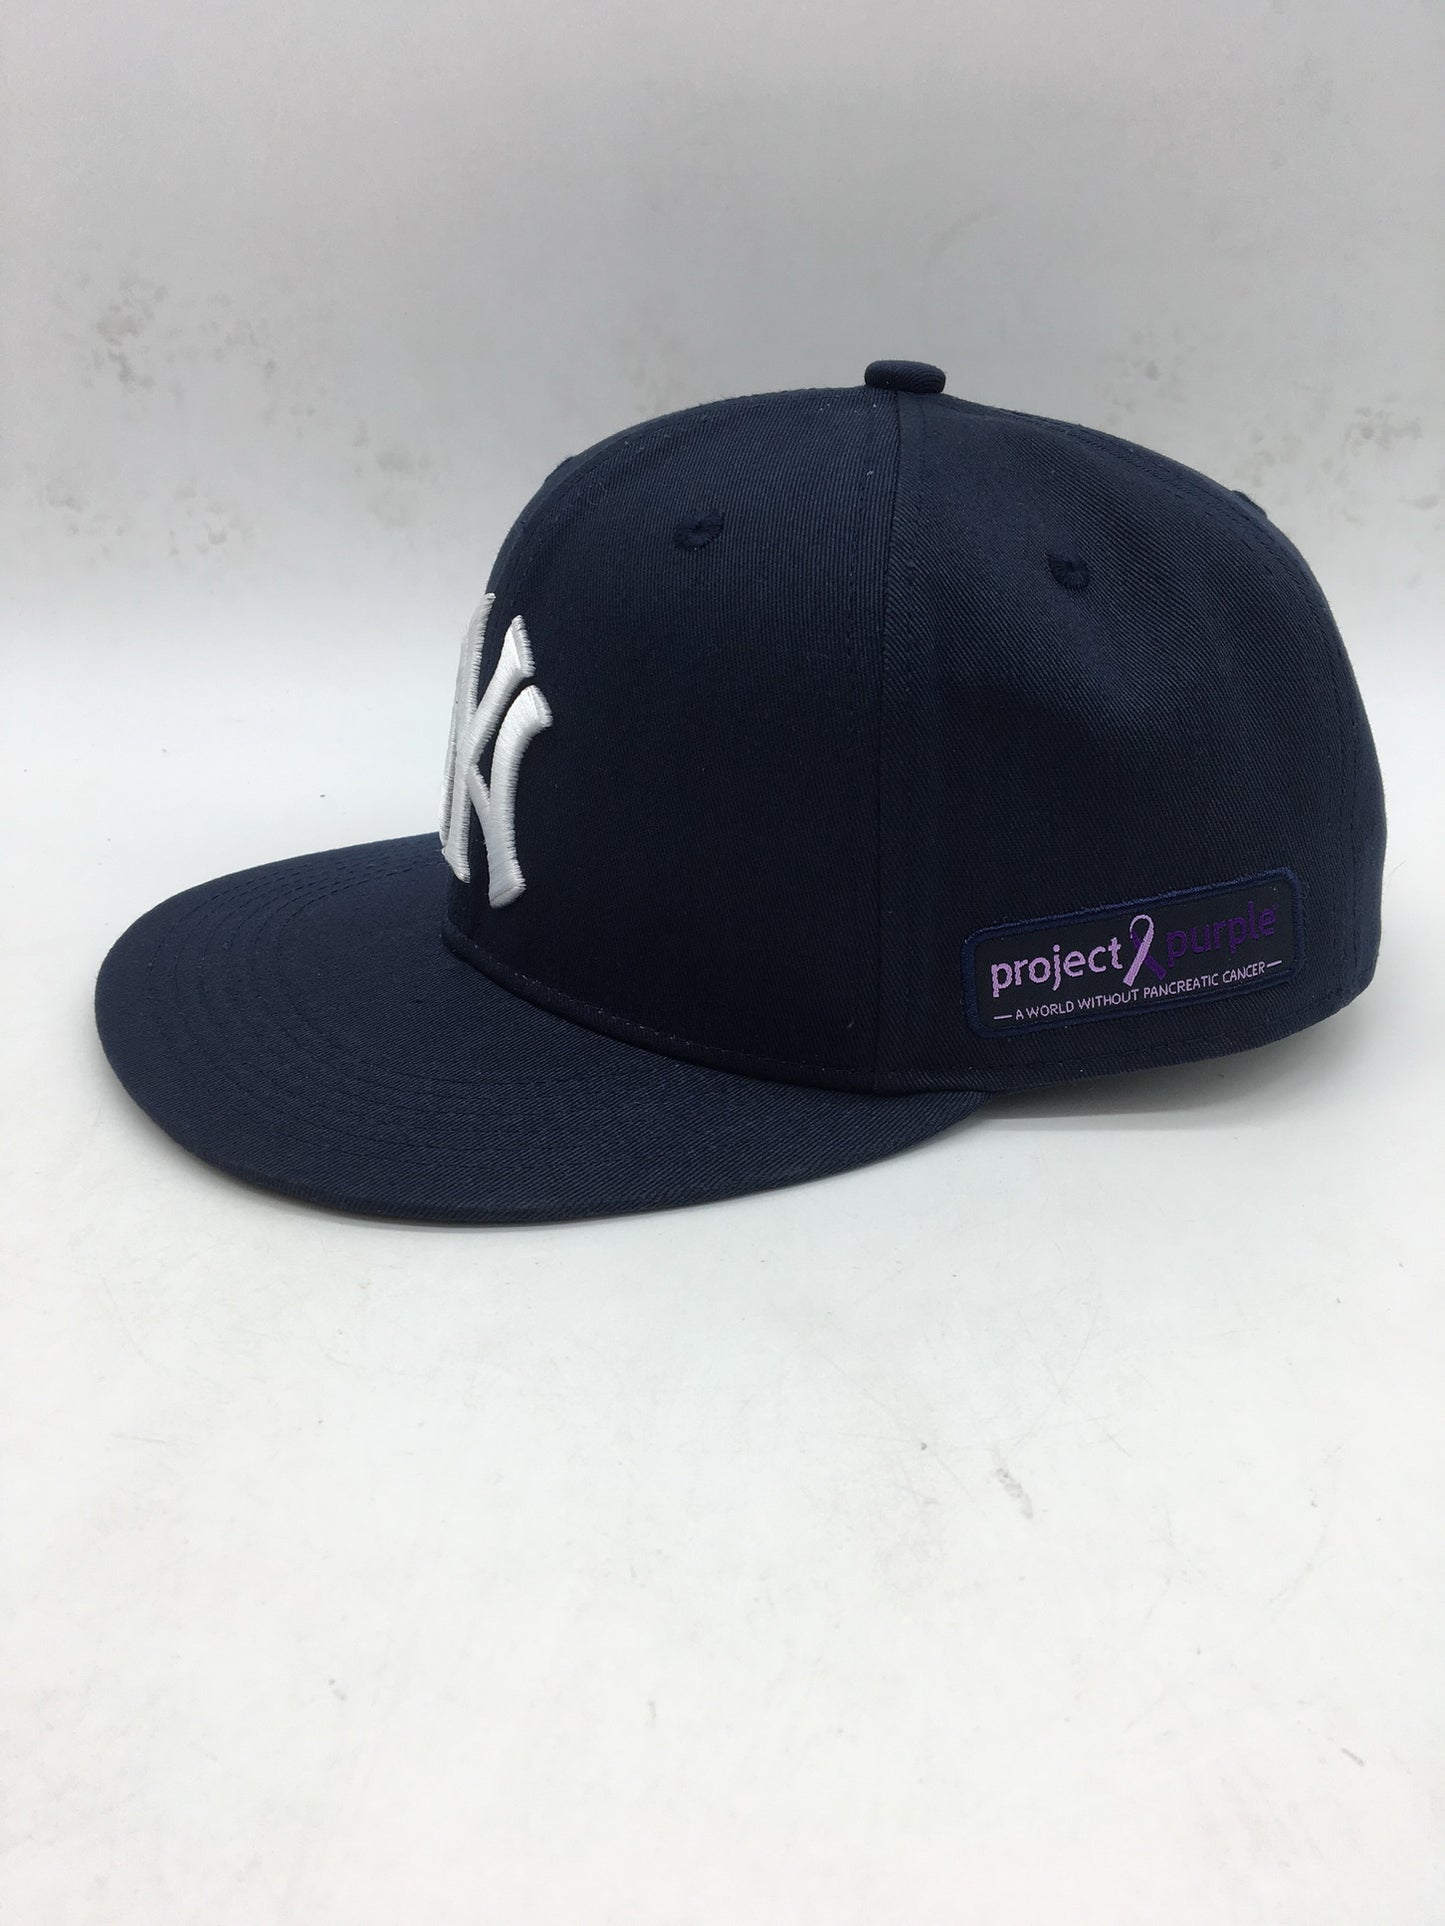 Side view of Yankee hat with Project purple logo